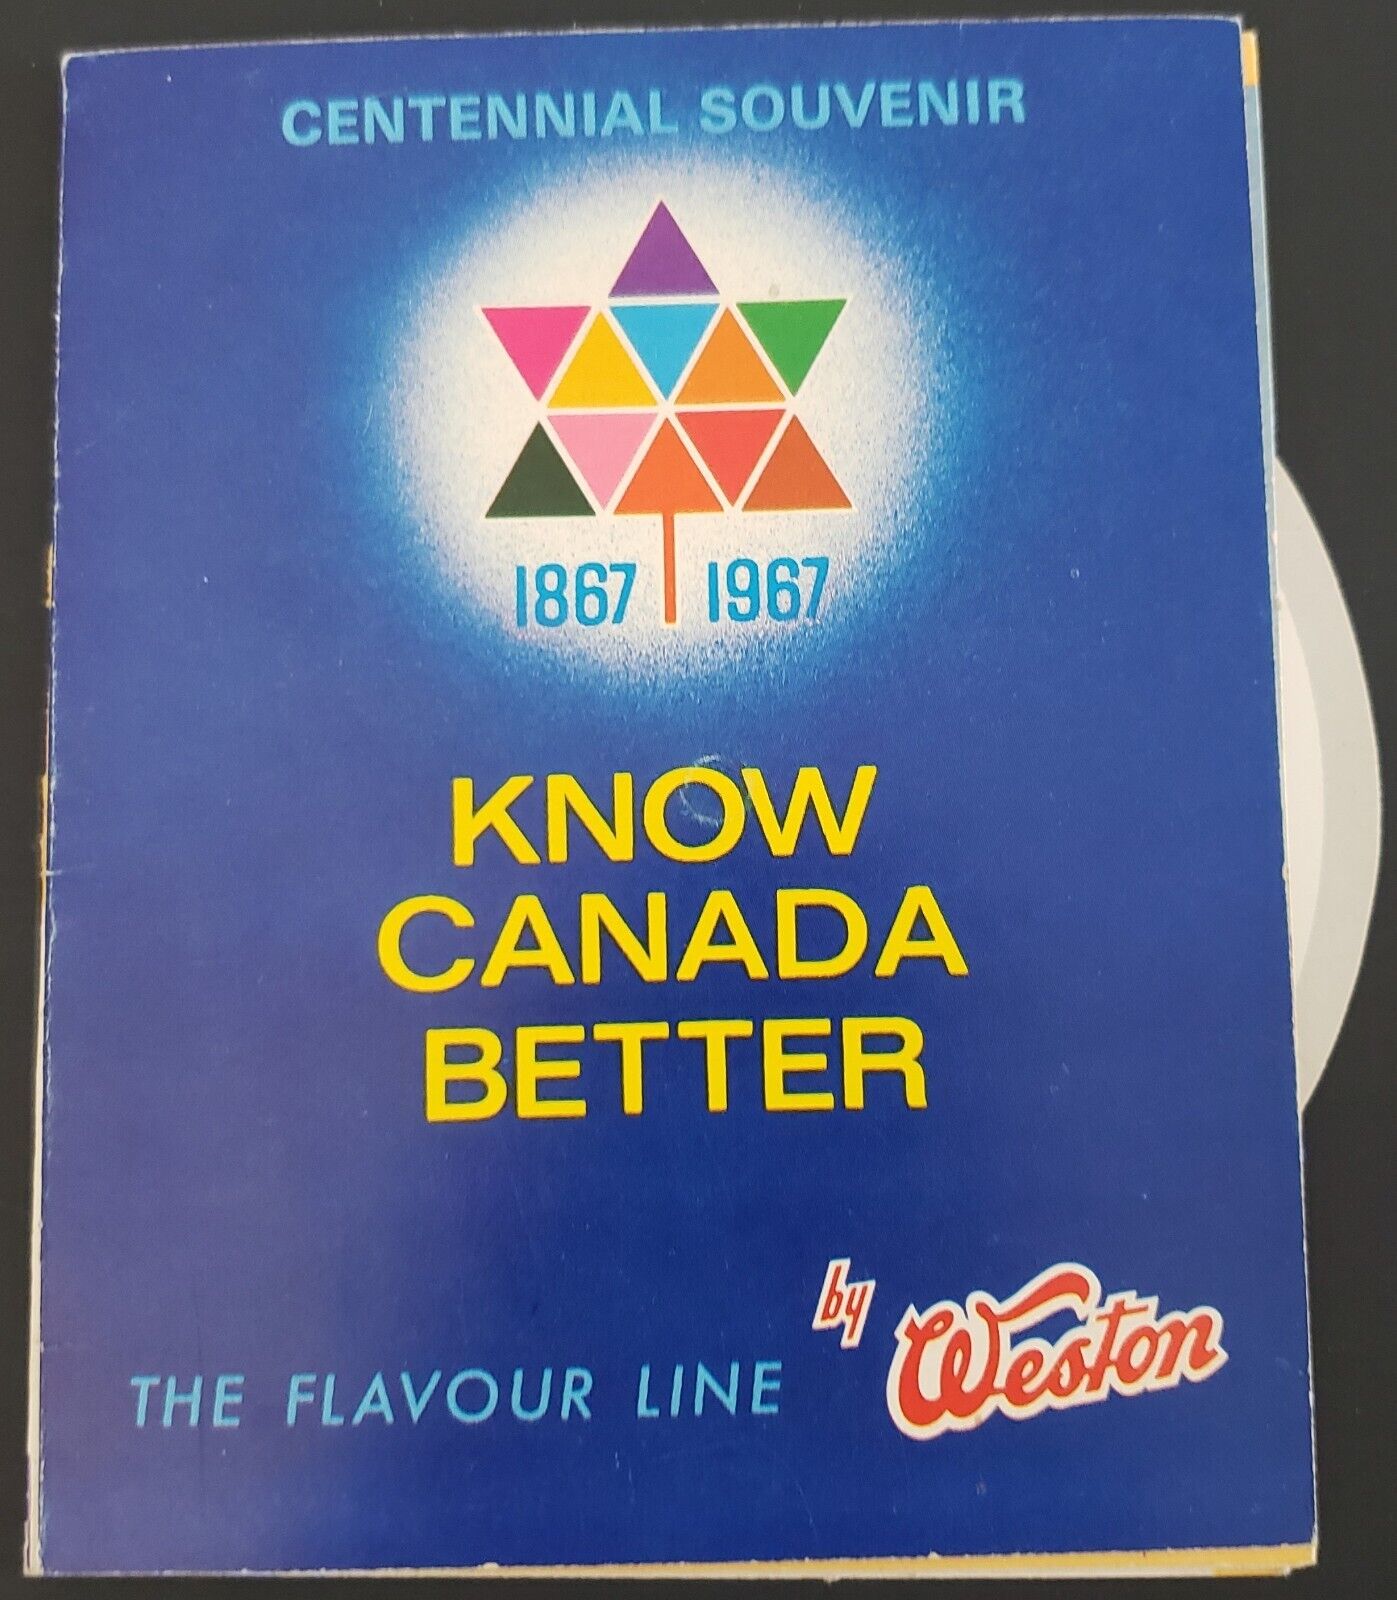 Centennial Souvenir 1867 1967 Know Canada Better Weston Biscuits & Candy